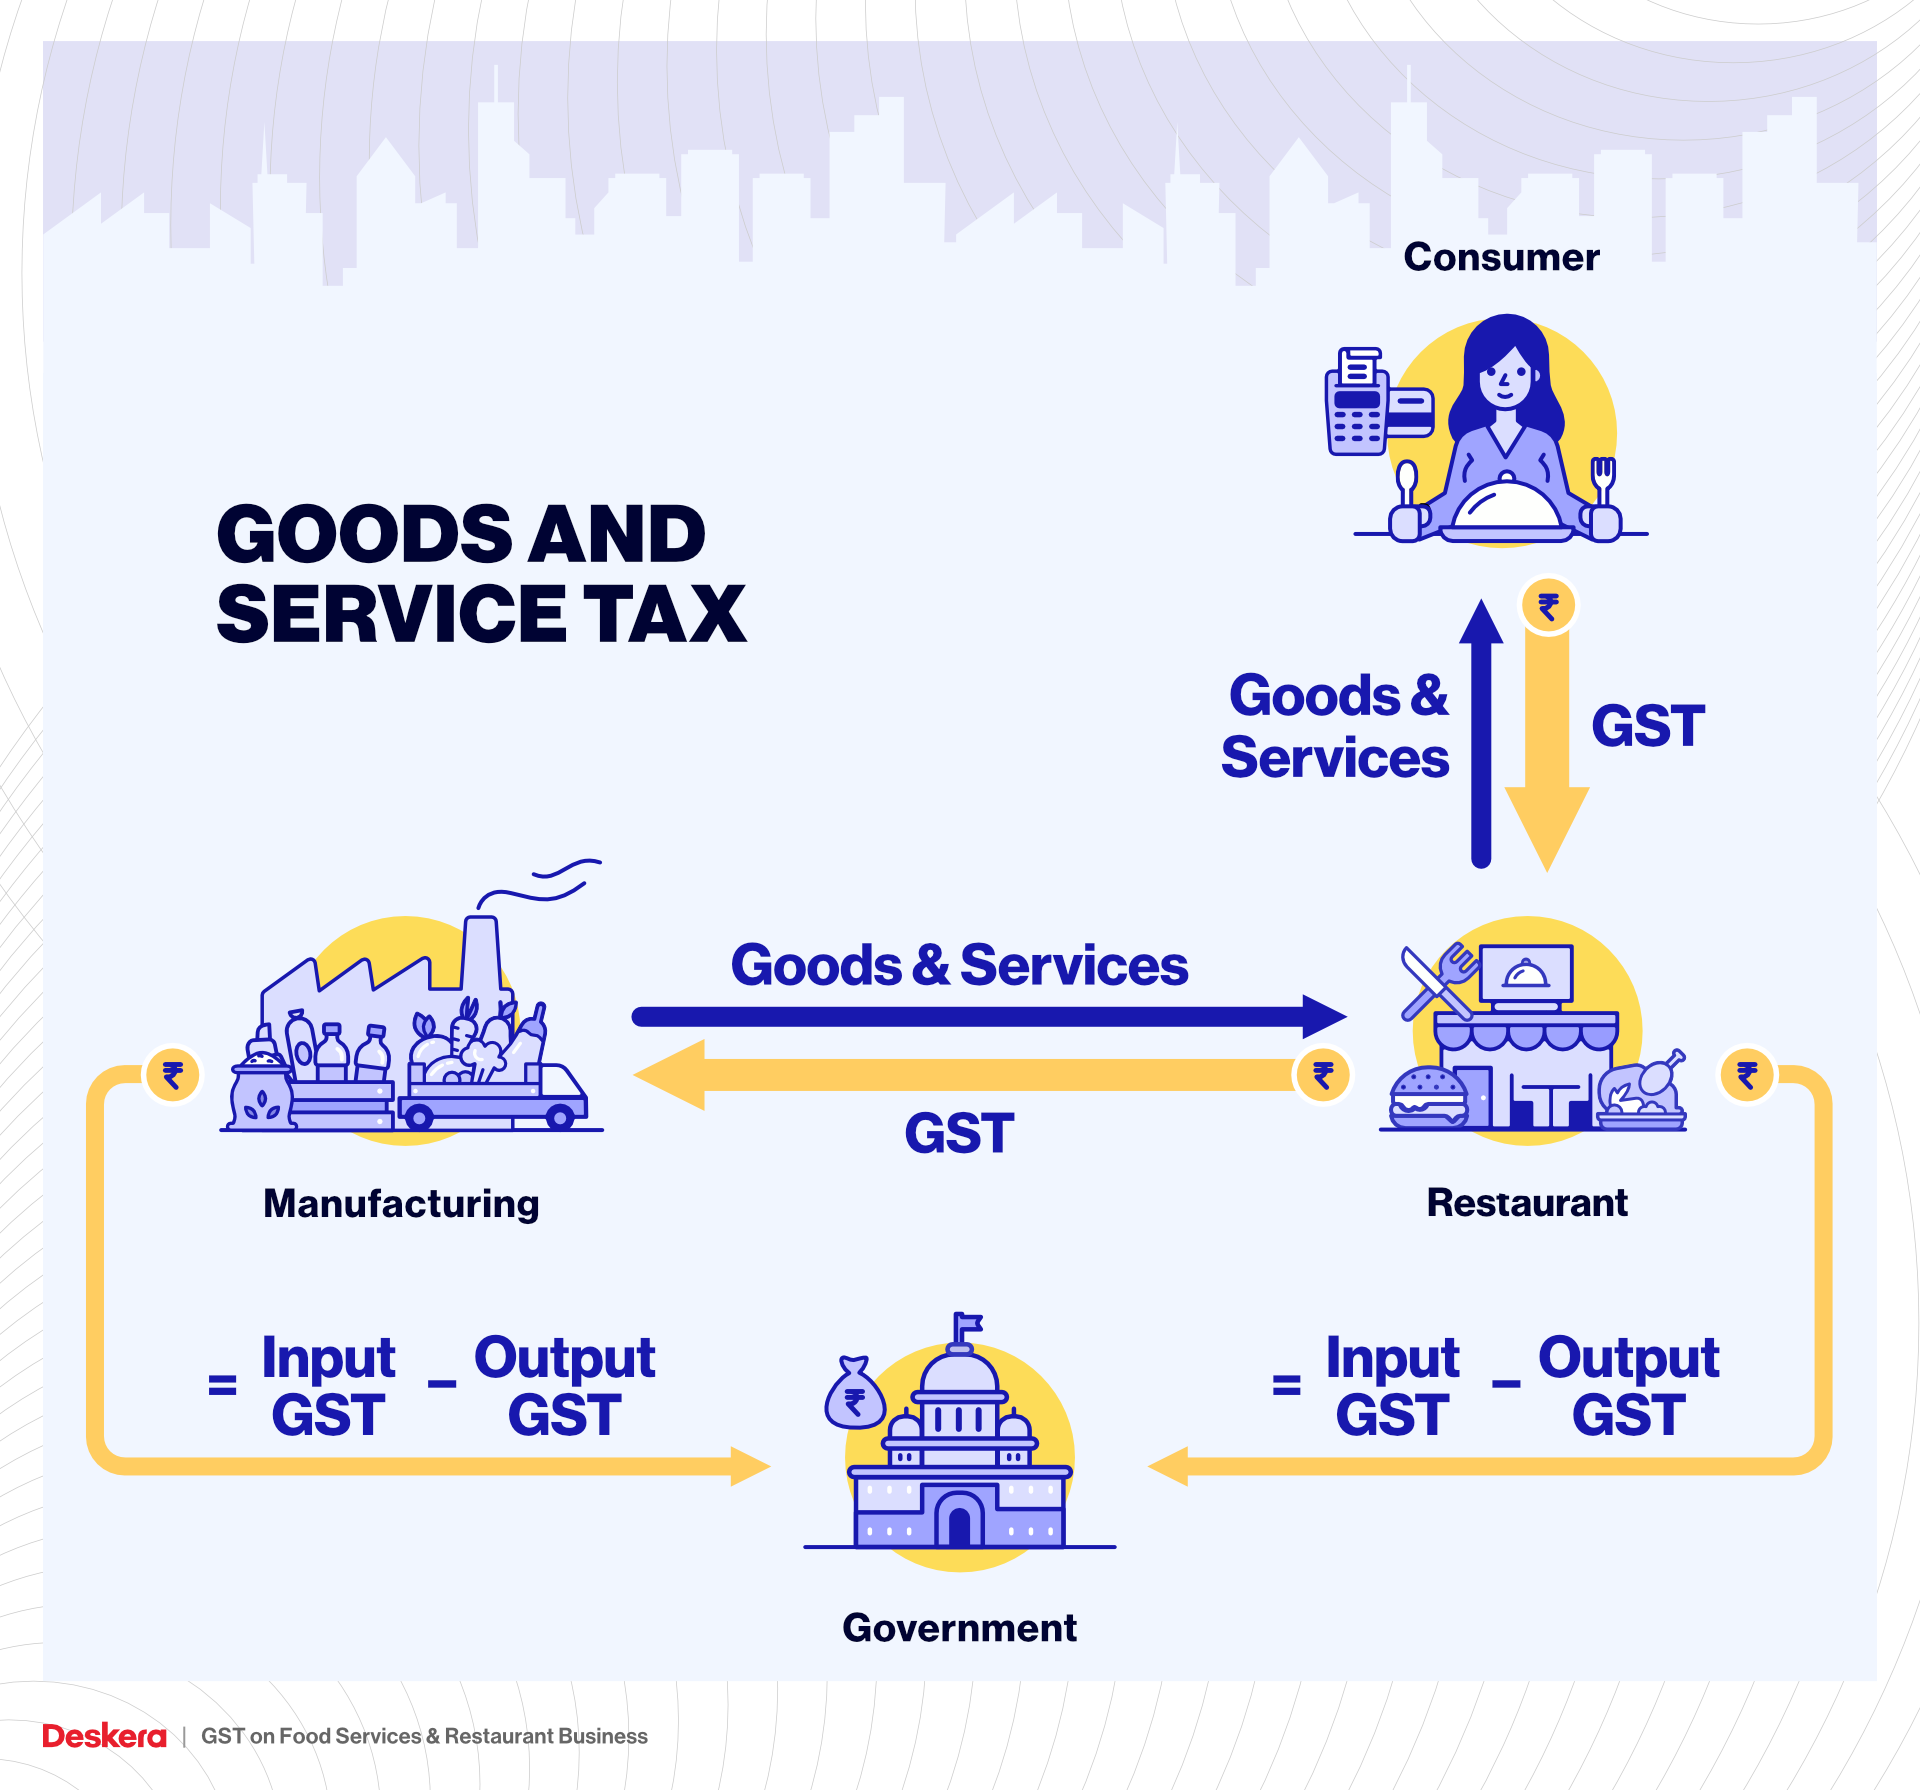 gst-on-food-services-restaurant-business